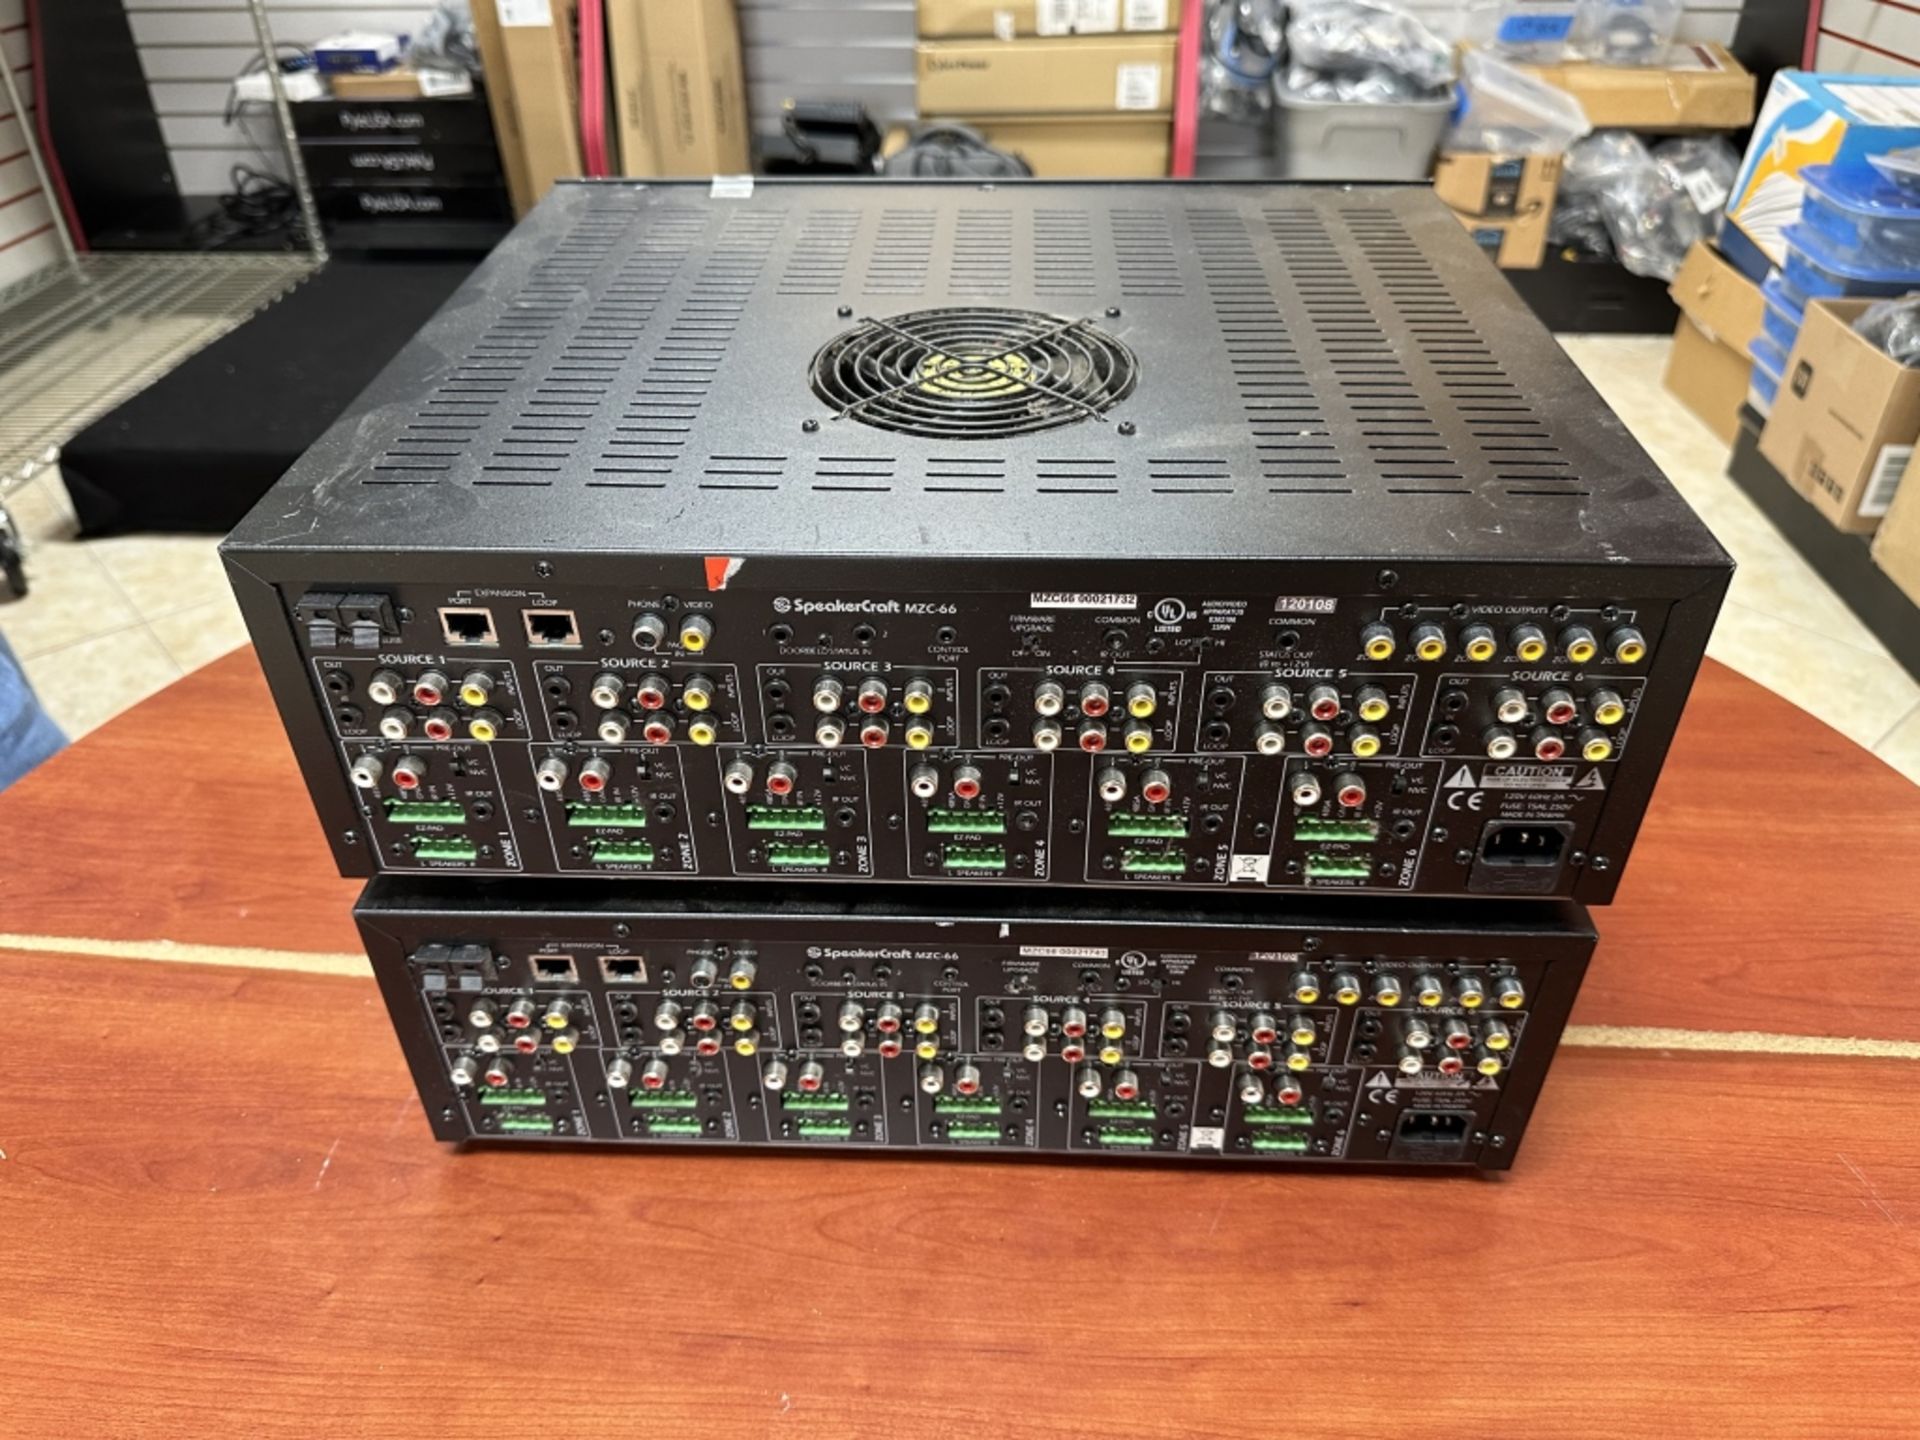 SPEAKERCRAFT MZC-66 POWER AMPLIFIER (NOT TESTED) - Image 2 of 2